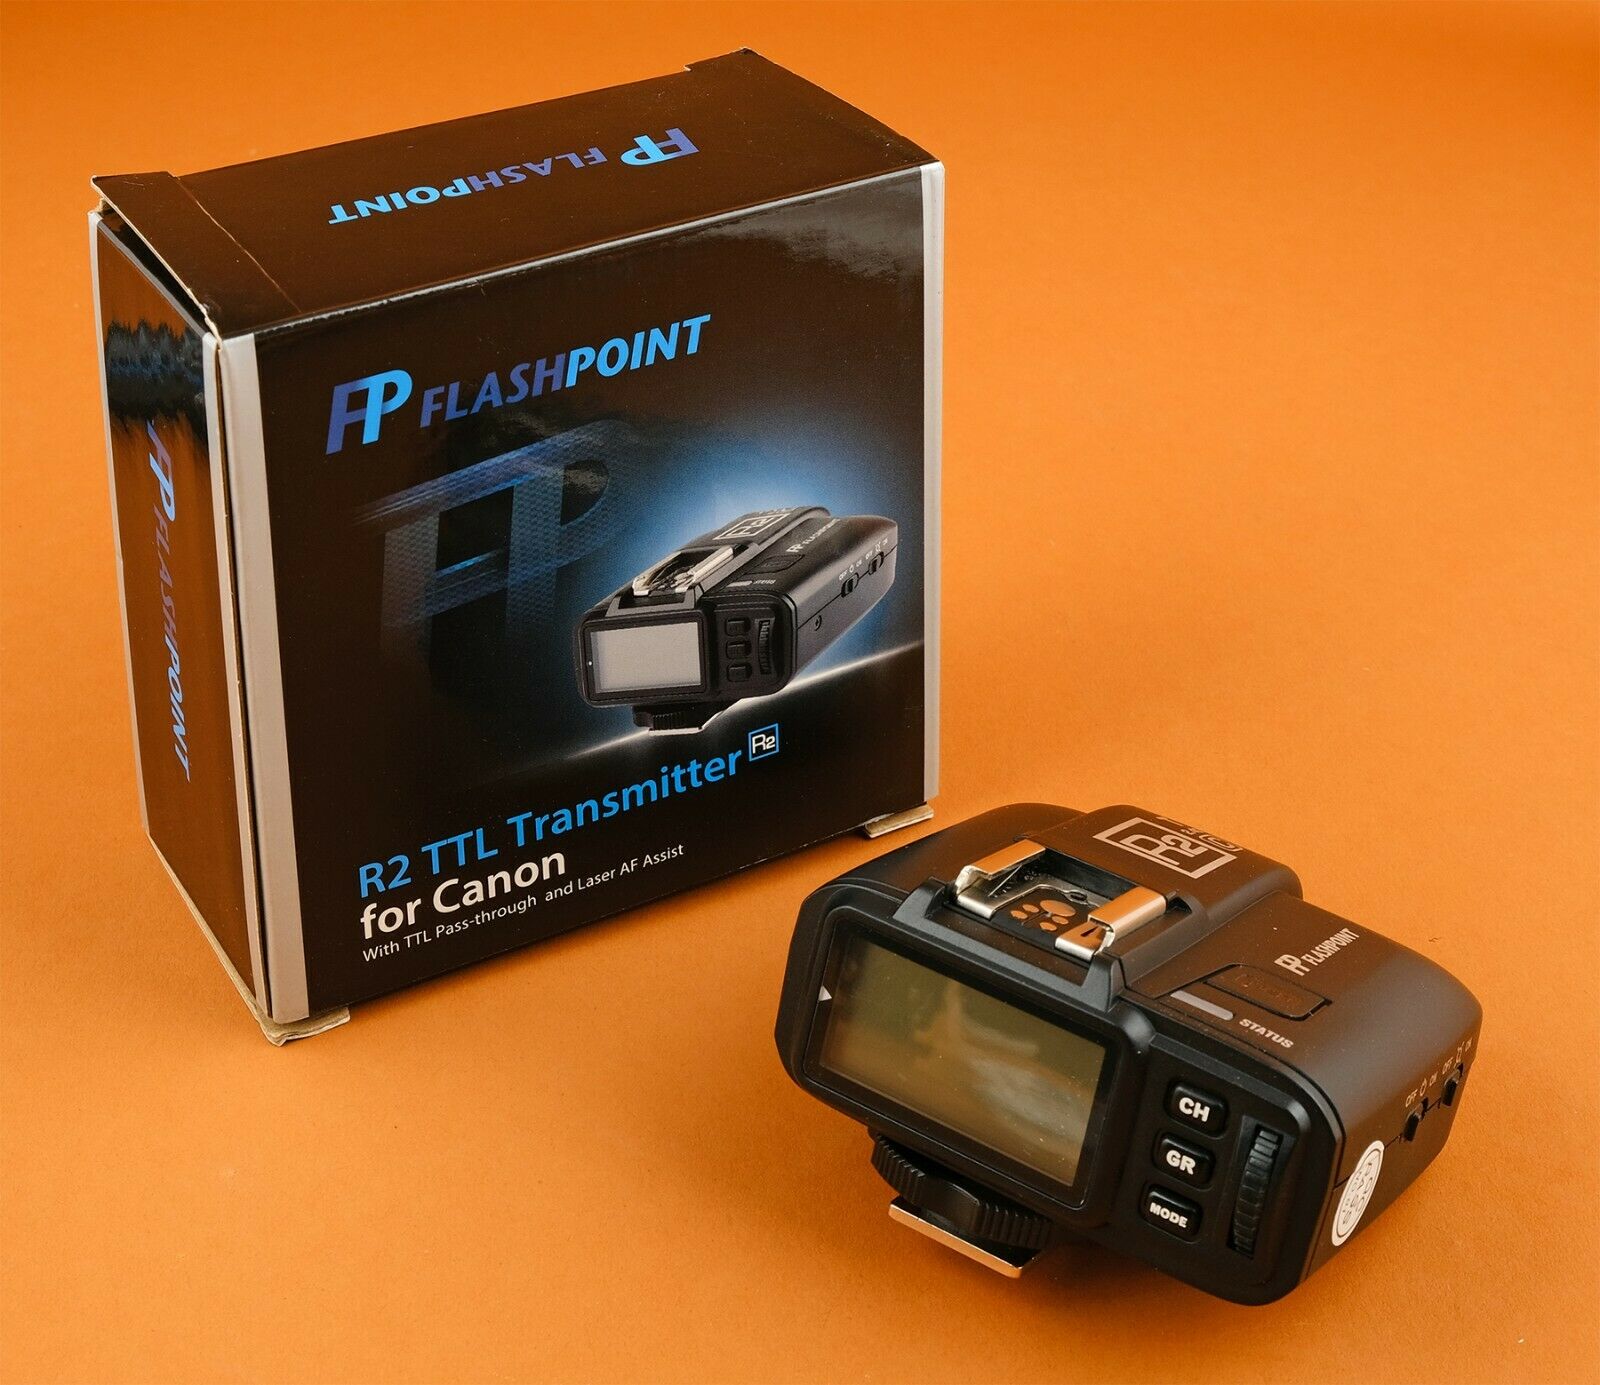 Flashpoint (godox) R2 I-ttl 2.4g Wireless Transmitter For Canon Cameras